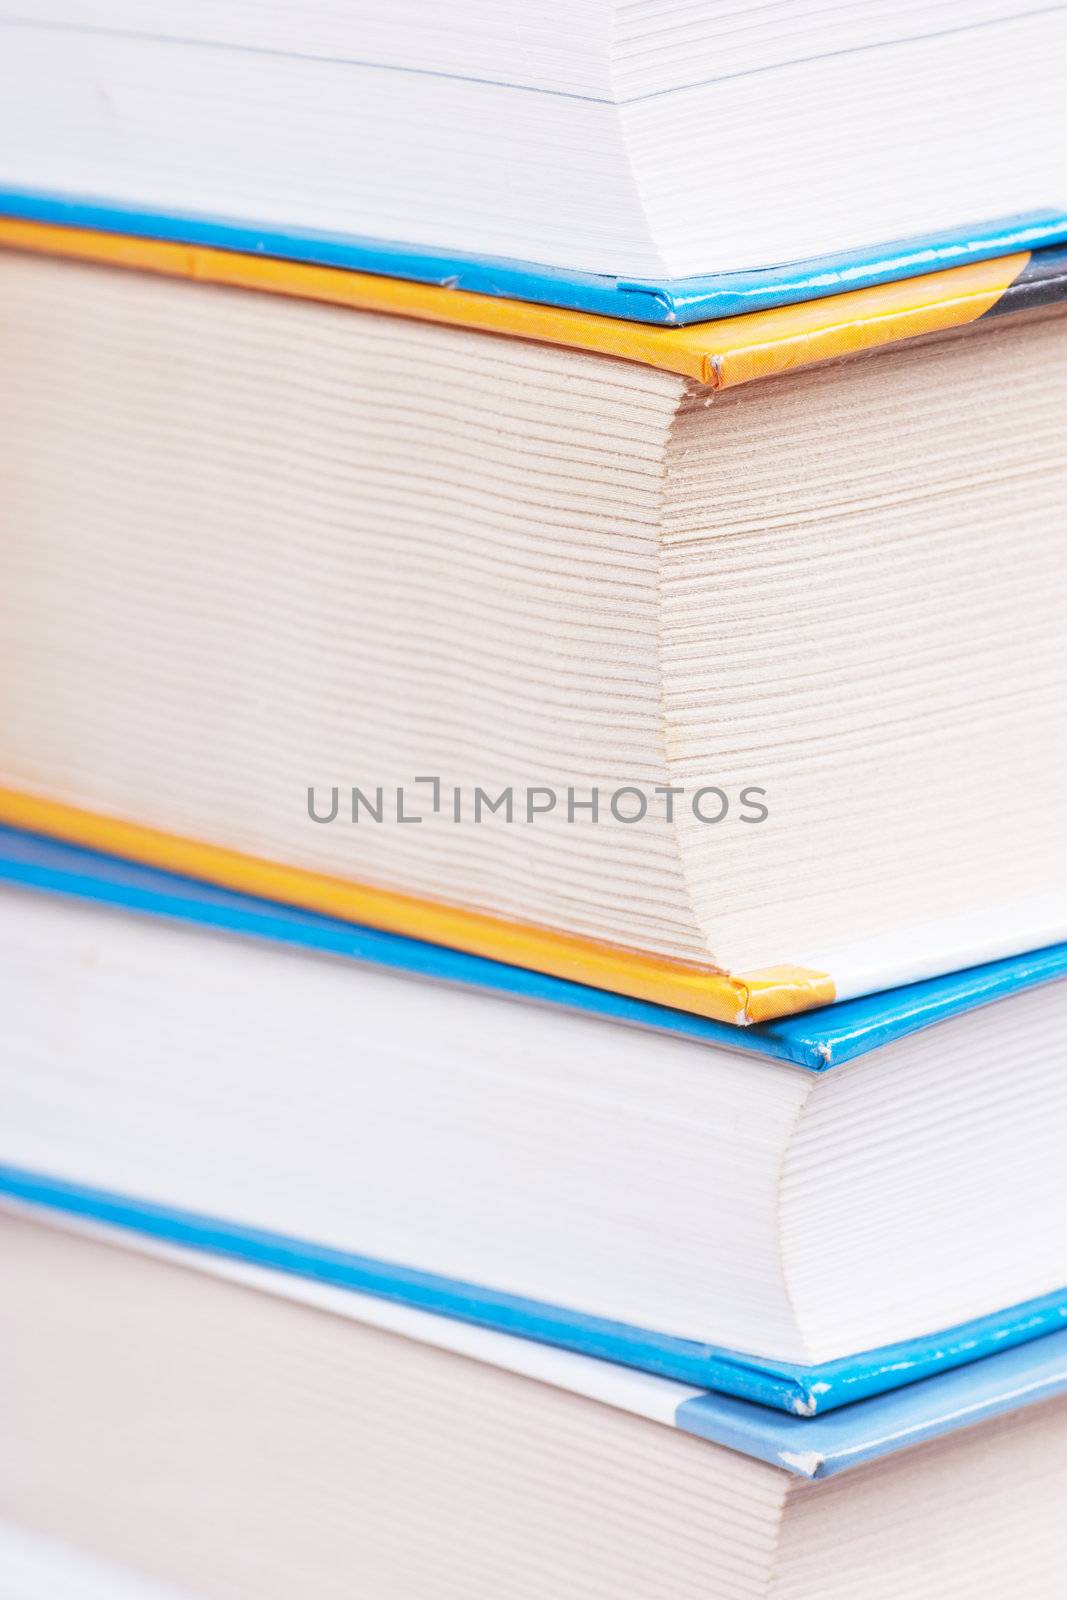 A stack of books. Closeup view.